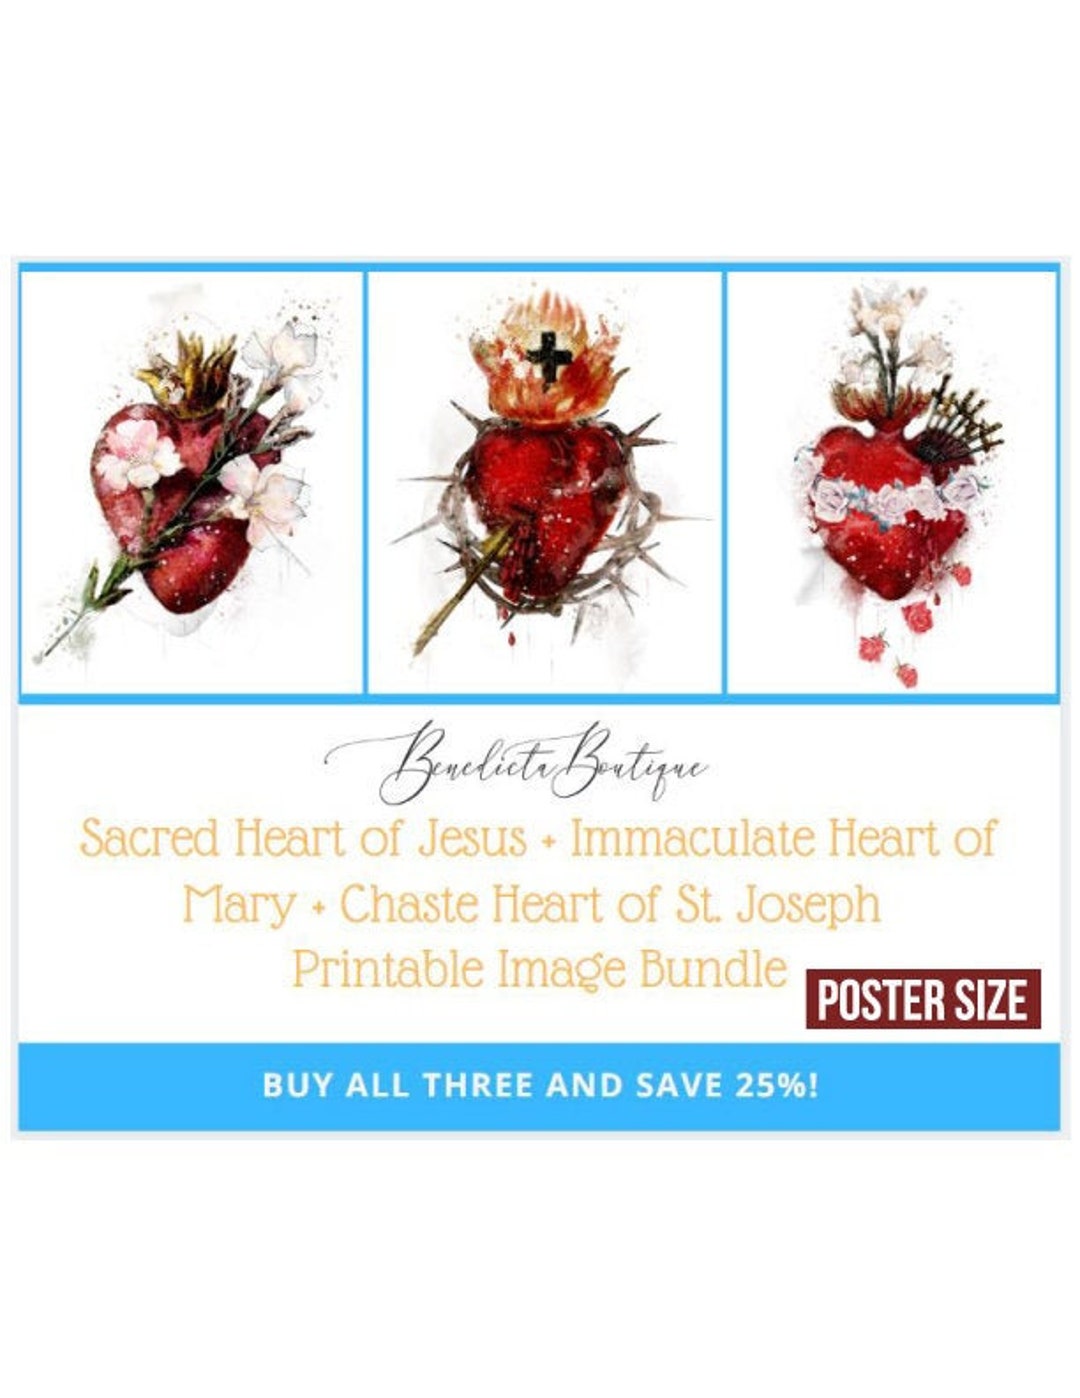 Sacred Heart of Jesus, Immaculate Heart of Mary and Chaste Heart